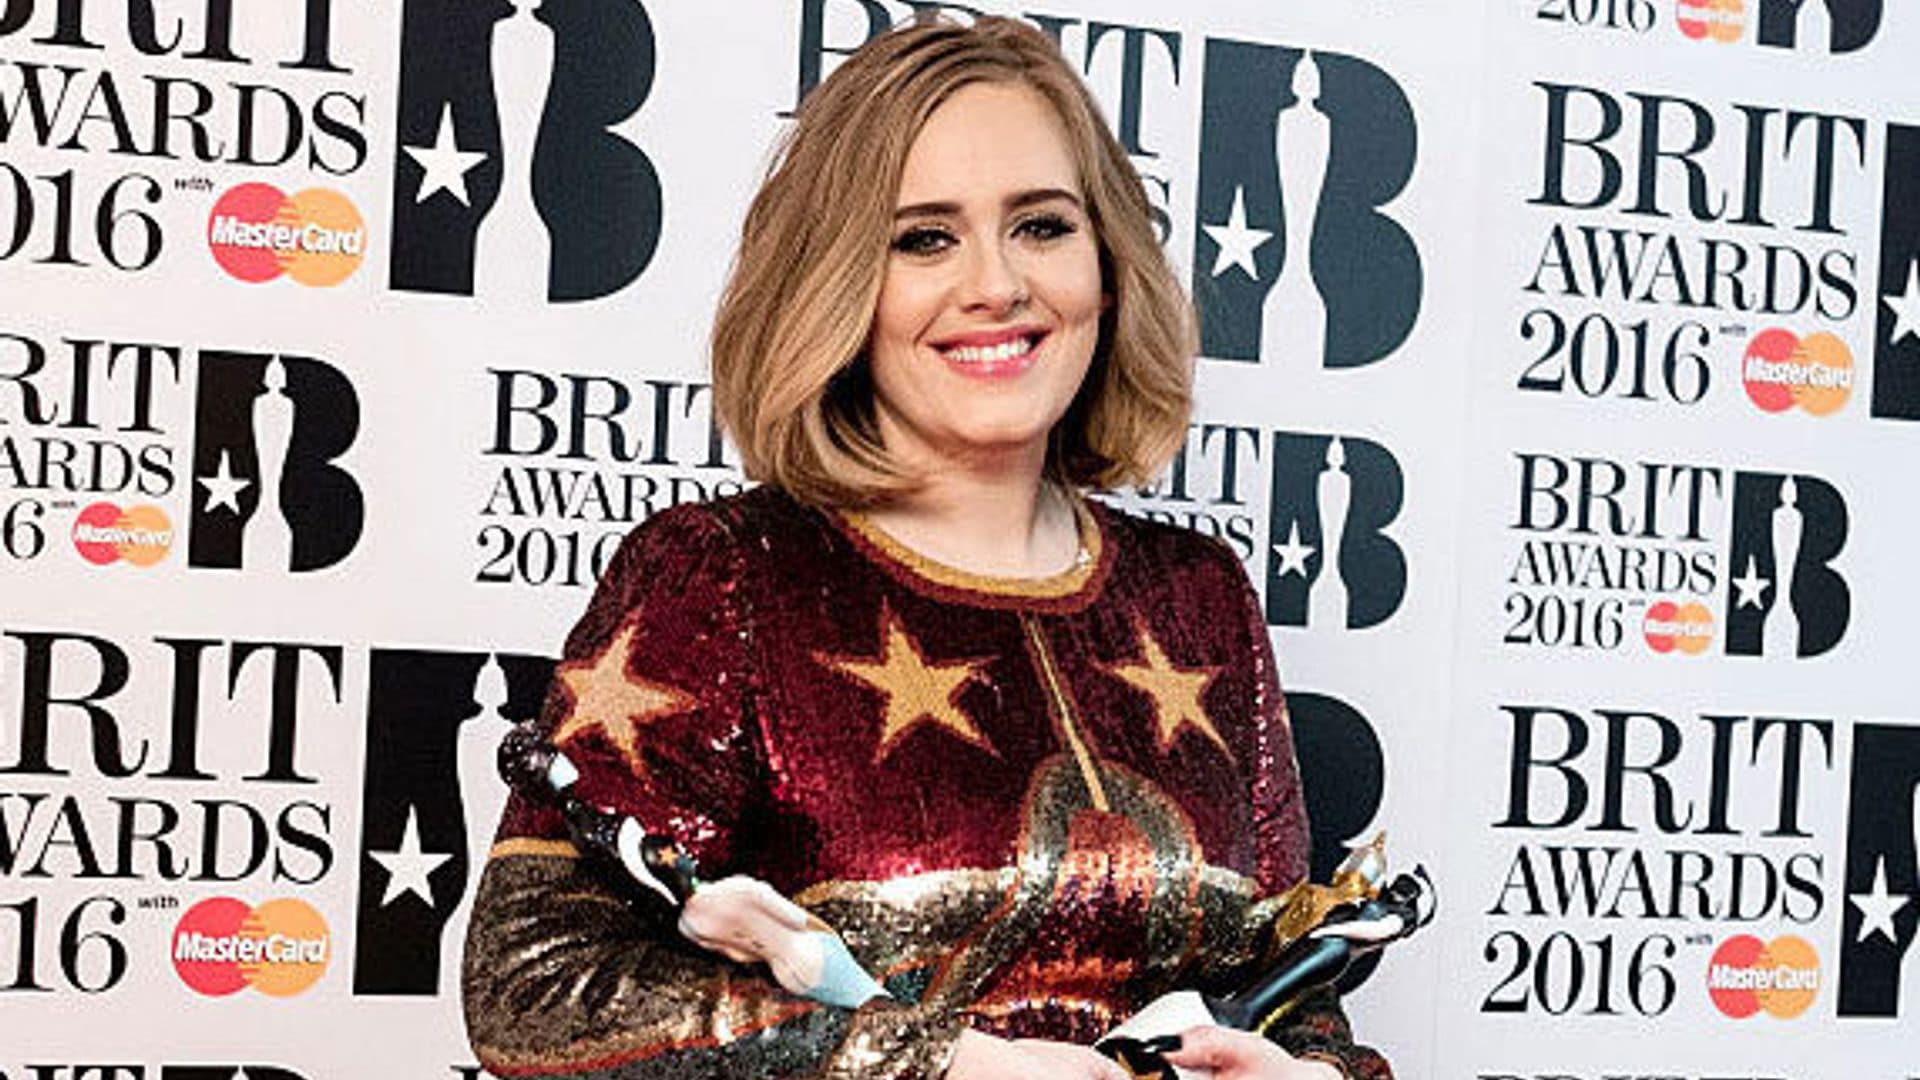 Adele is stunning even with a cold — see the photo to prove it!